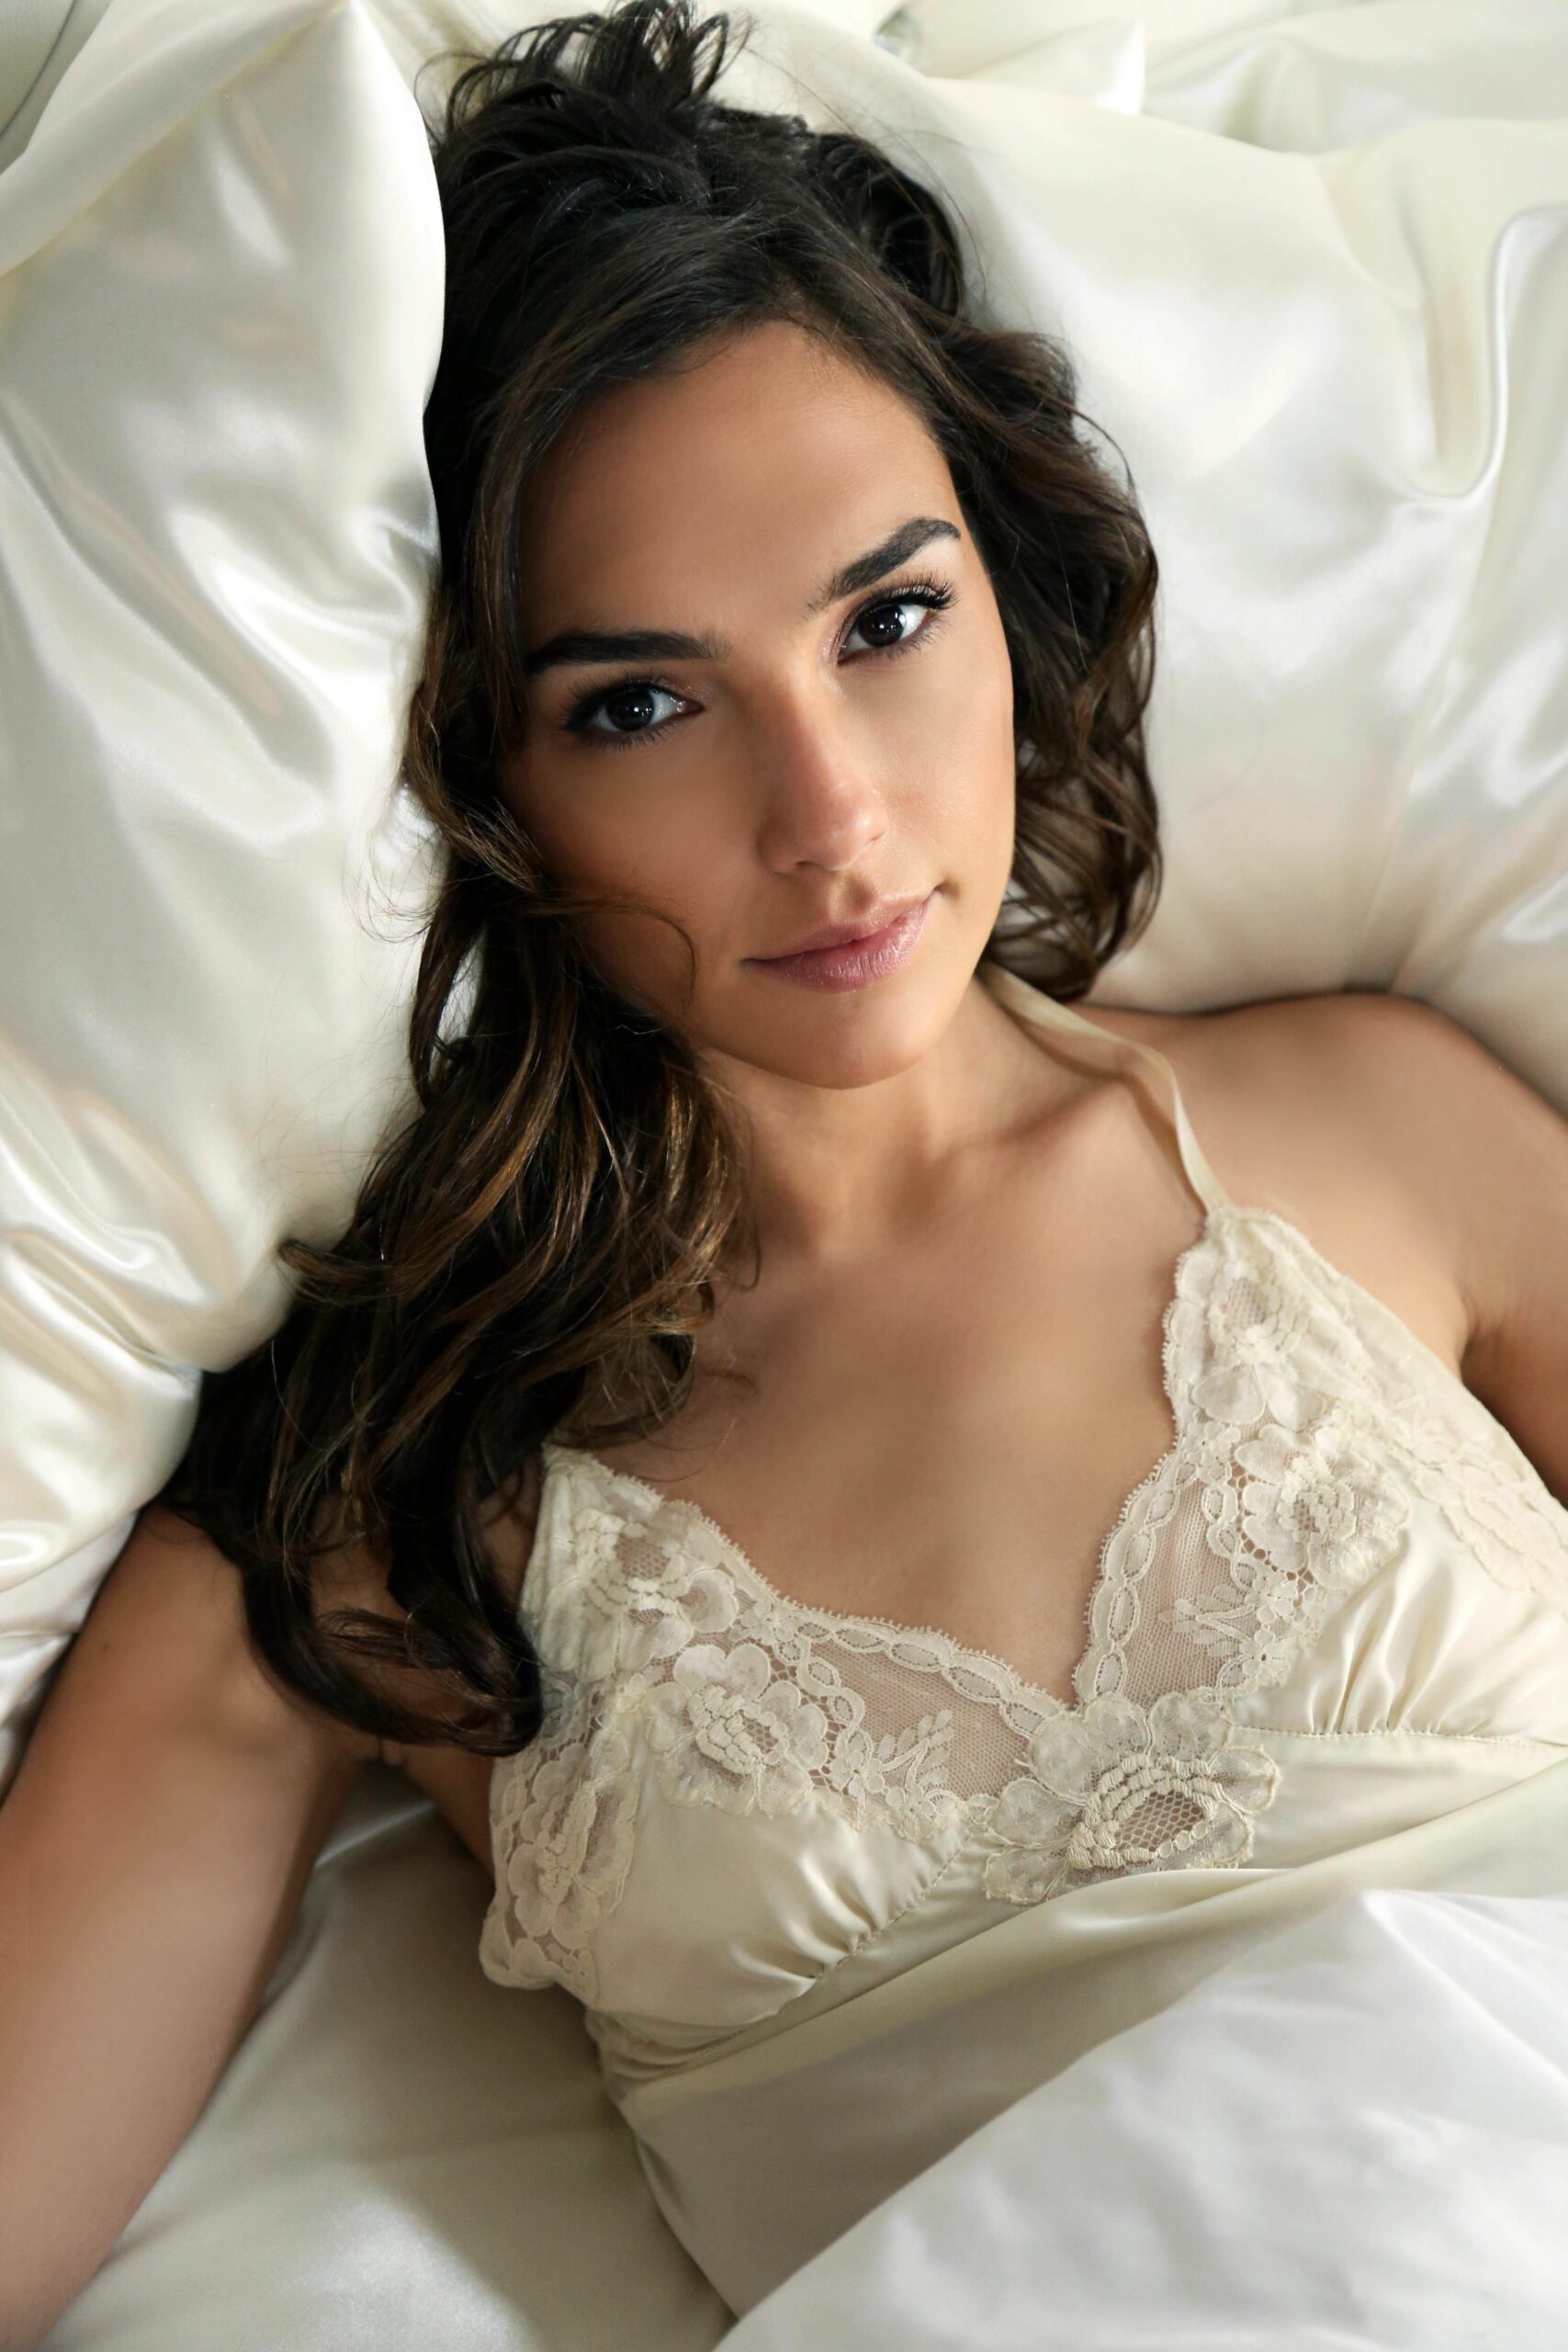 I will roleplay as Gal Gadot or any other celeb